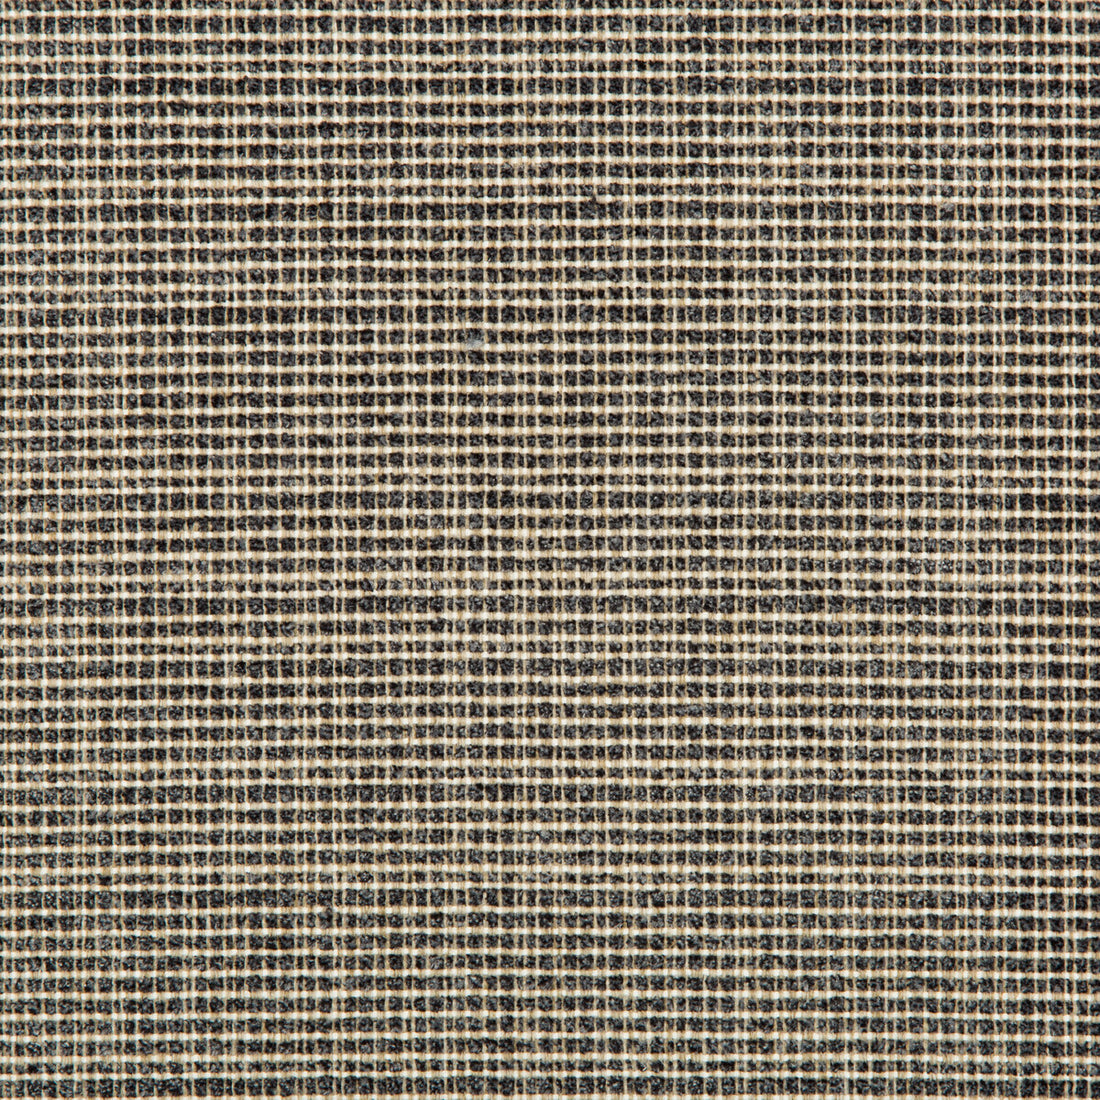 Saddlebrook fabric in charcoal color - pattern 35345.816.0 - by Kravet Basics in the Greenwich collection